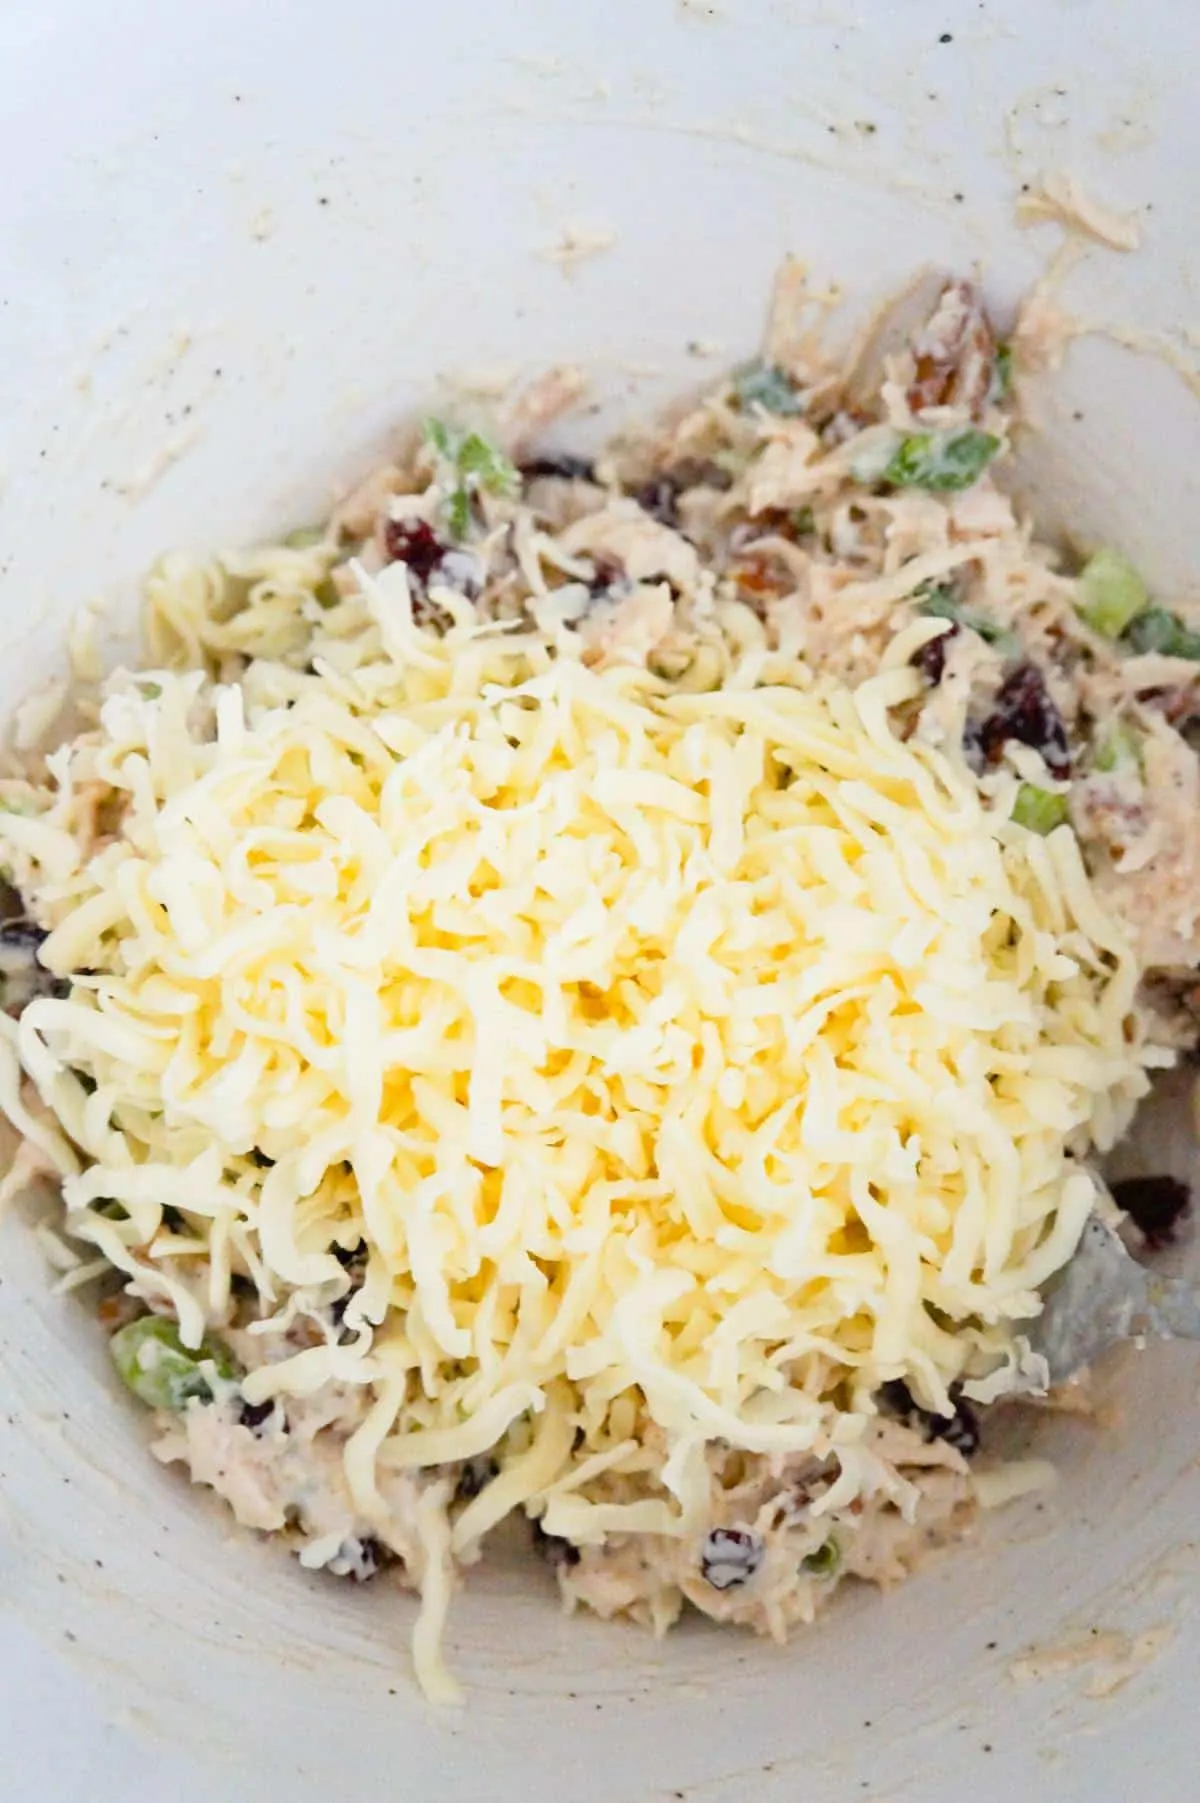 shredded mozzarella cheese on top of chicken salad mixture in a mixing bowl